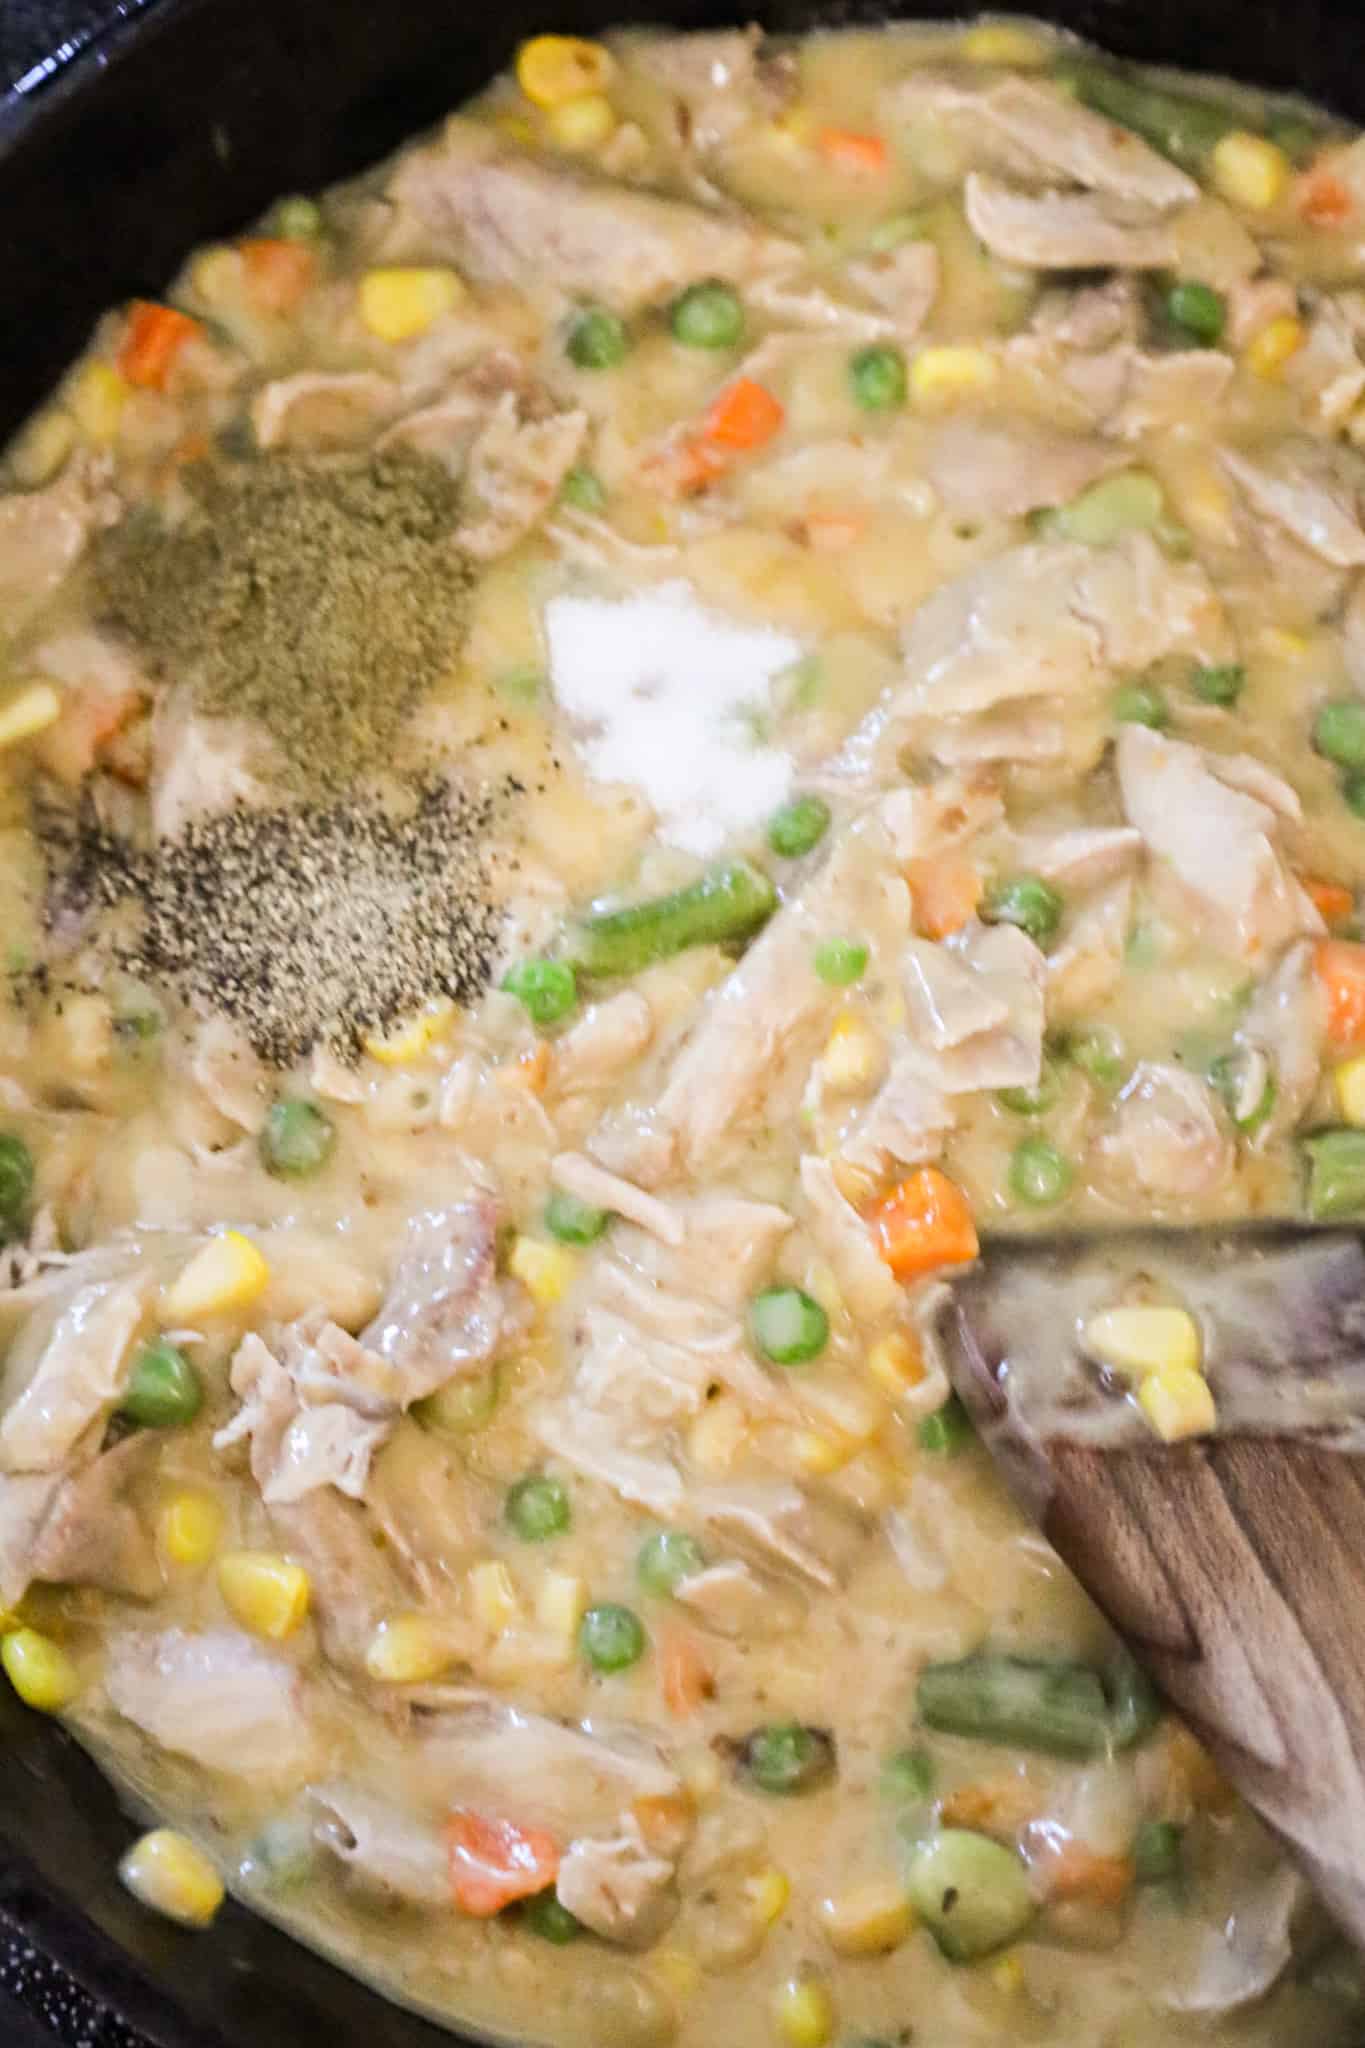 spices on top of shredded turkey and veggies mixture in a skillet